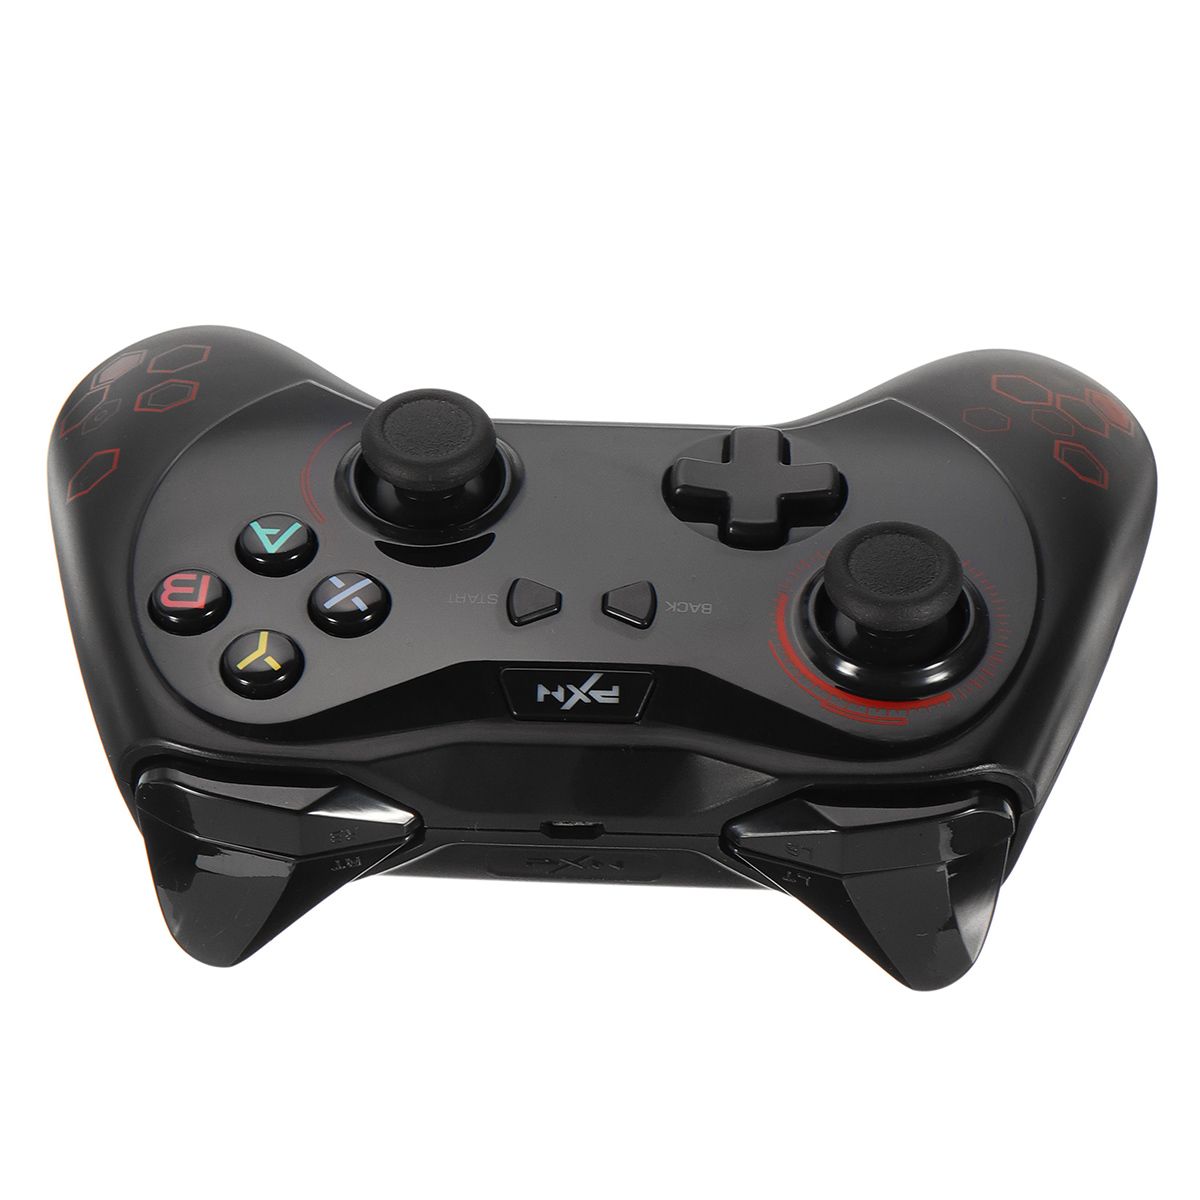 PXN-9606-bluetooth-40-Rechargeable-Gamepad-with-Mobile-Phone-Clip-Android-Mapping-Activator-1273995